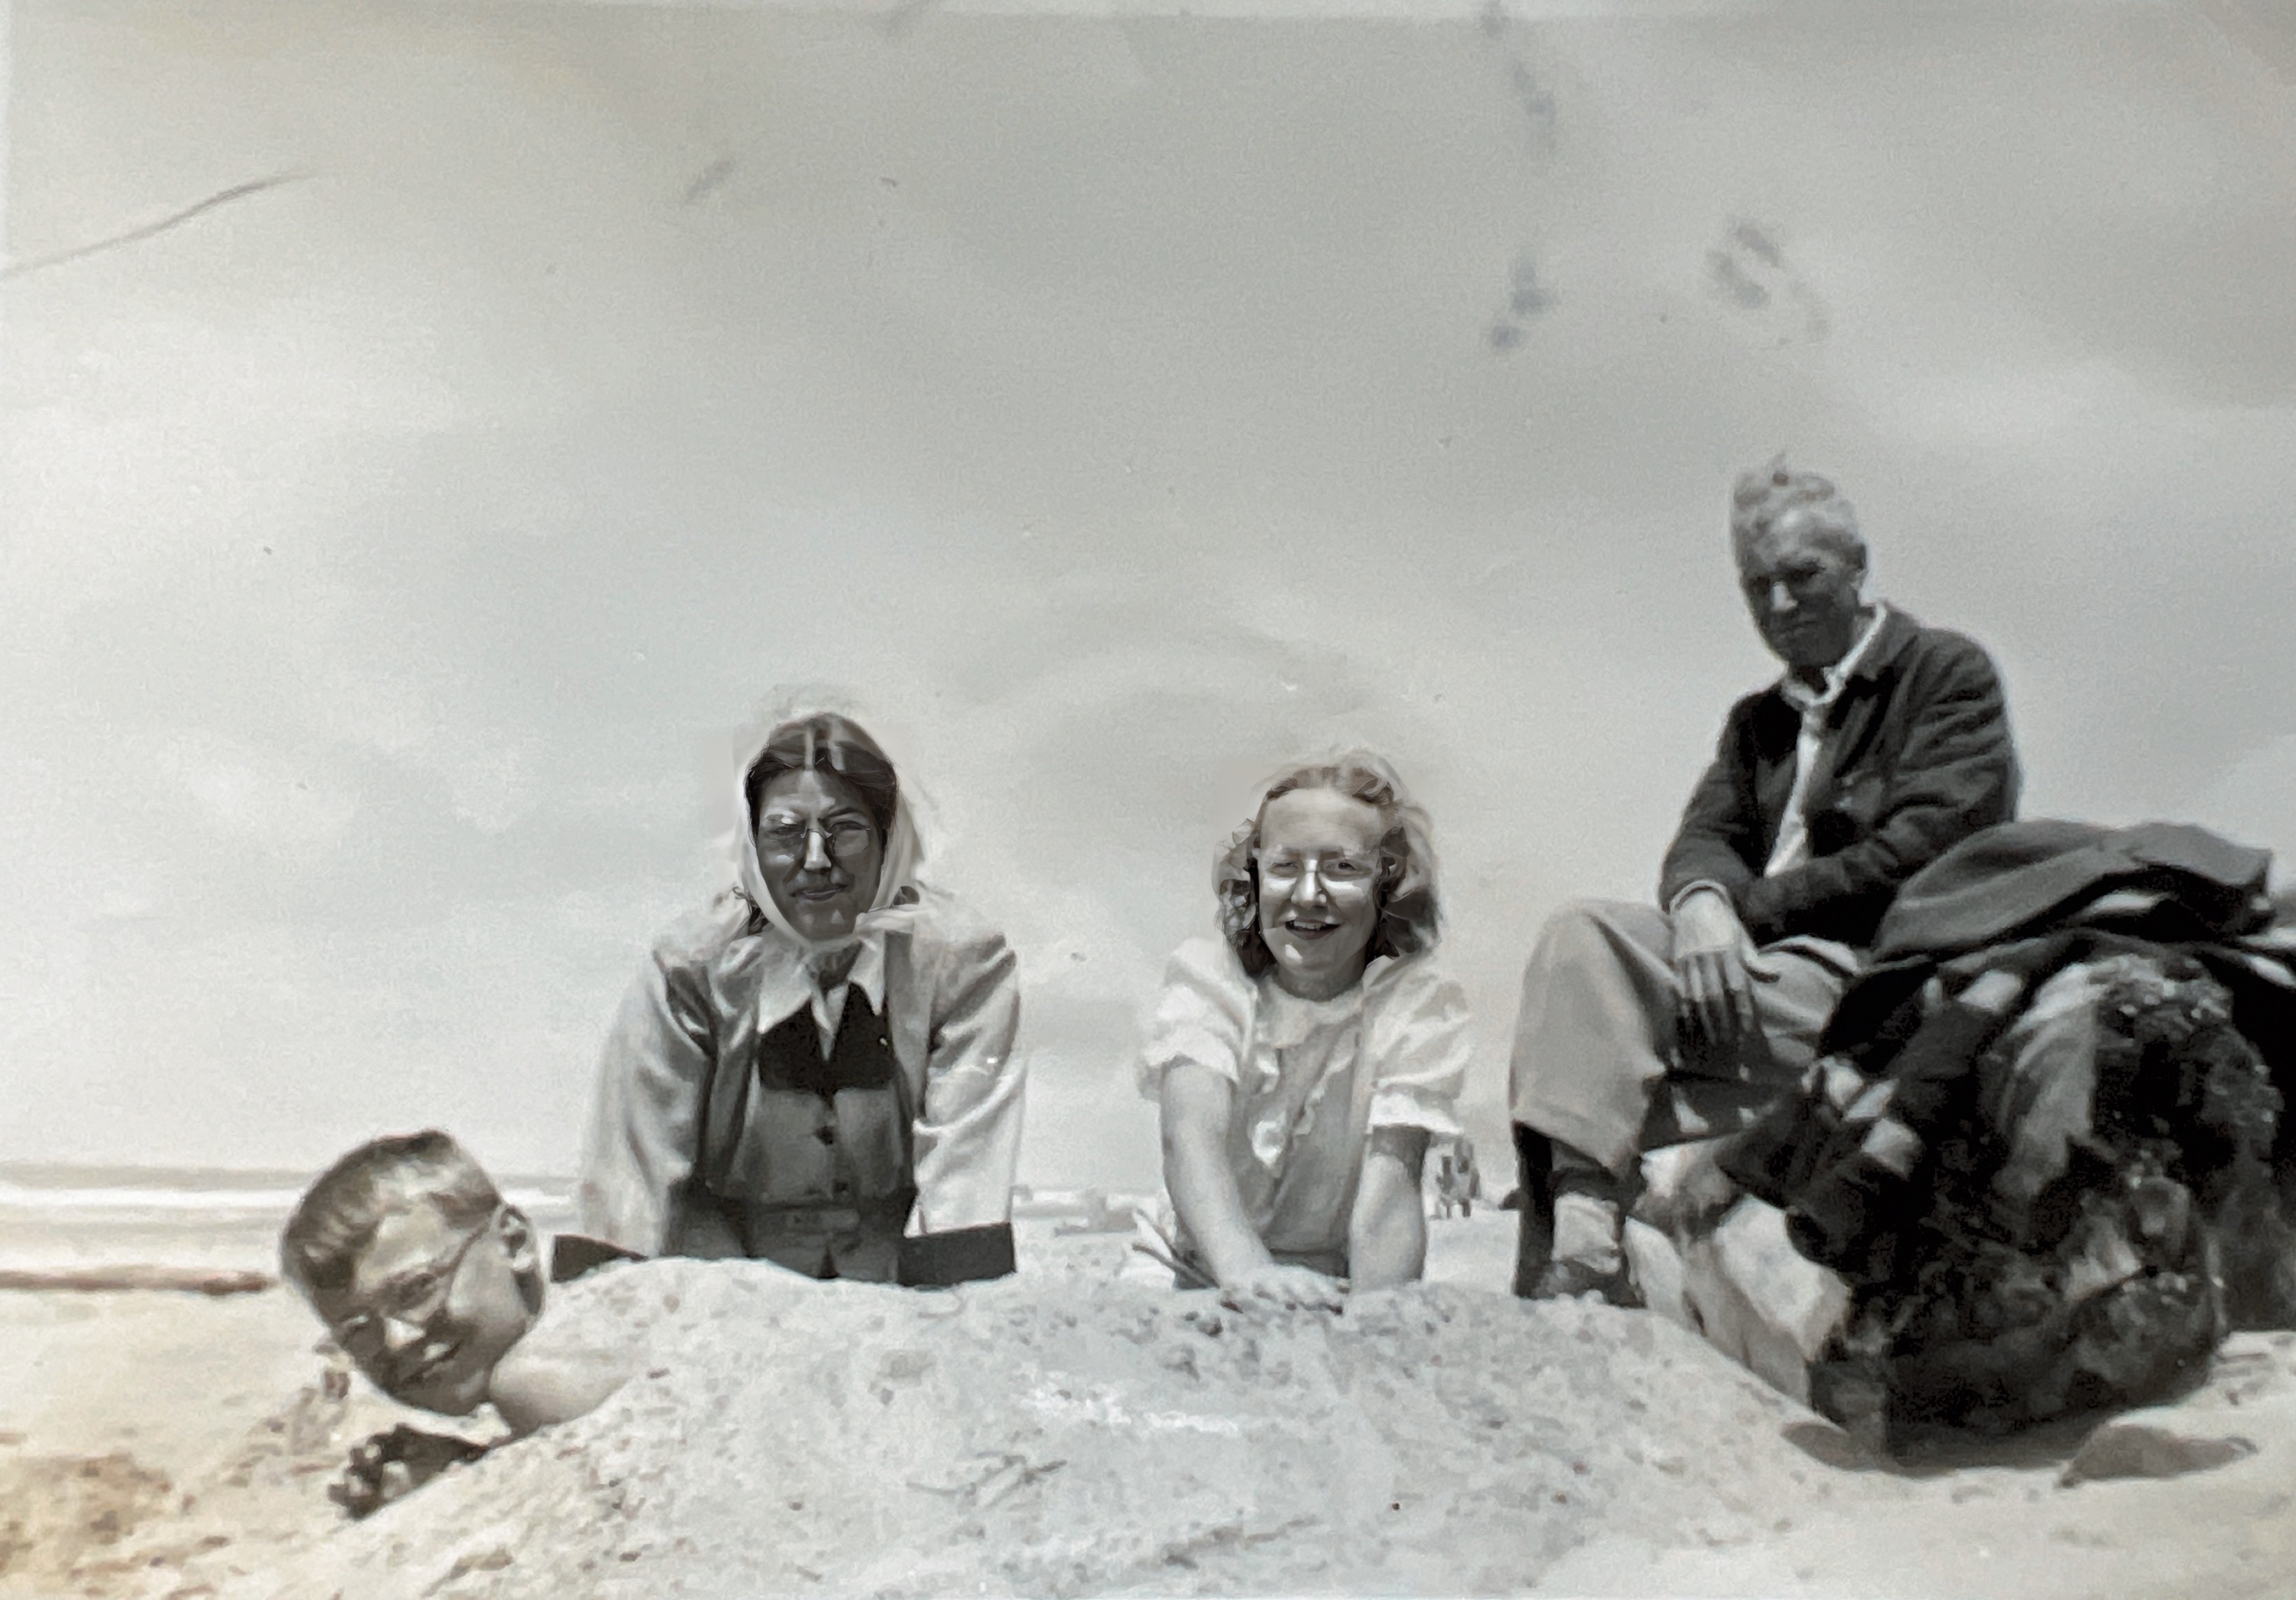 David (being buried), Gretchen, Sue Ann, and Paul Sadler at the beach in Lincoln City, Oregon. July 4, 1950